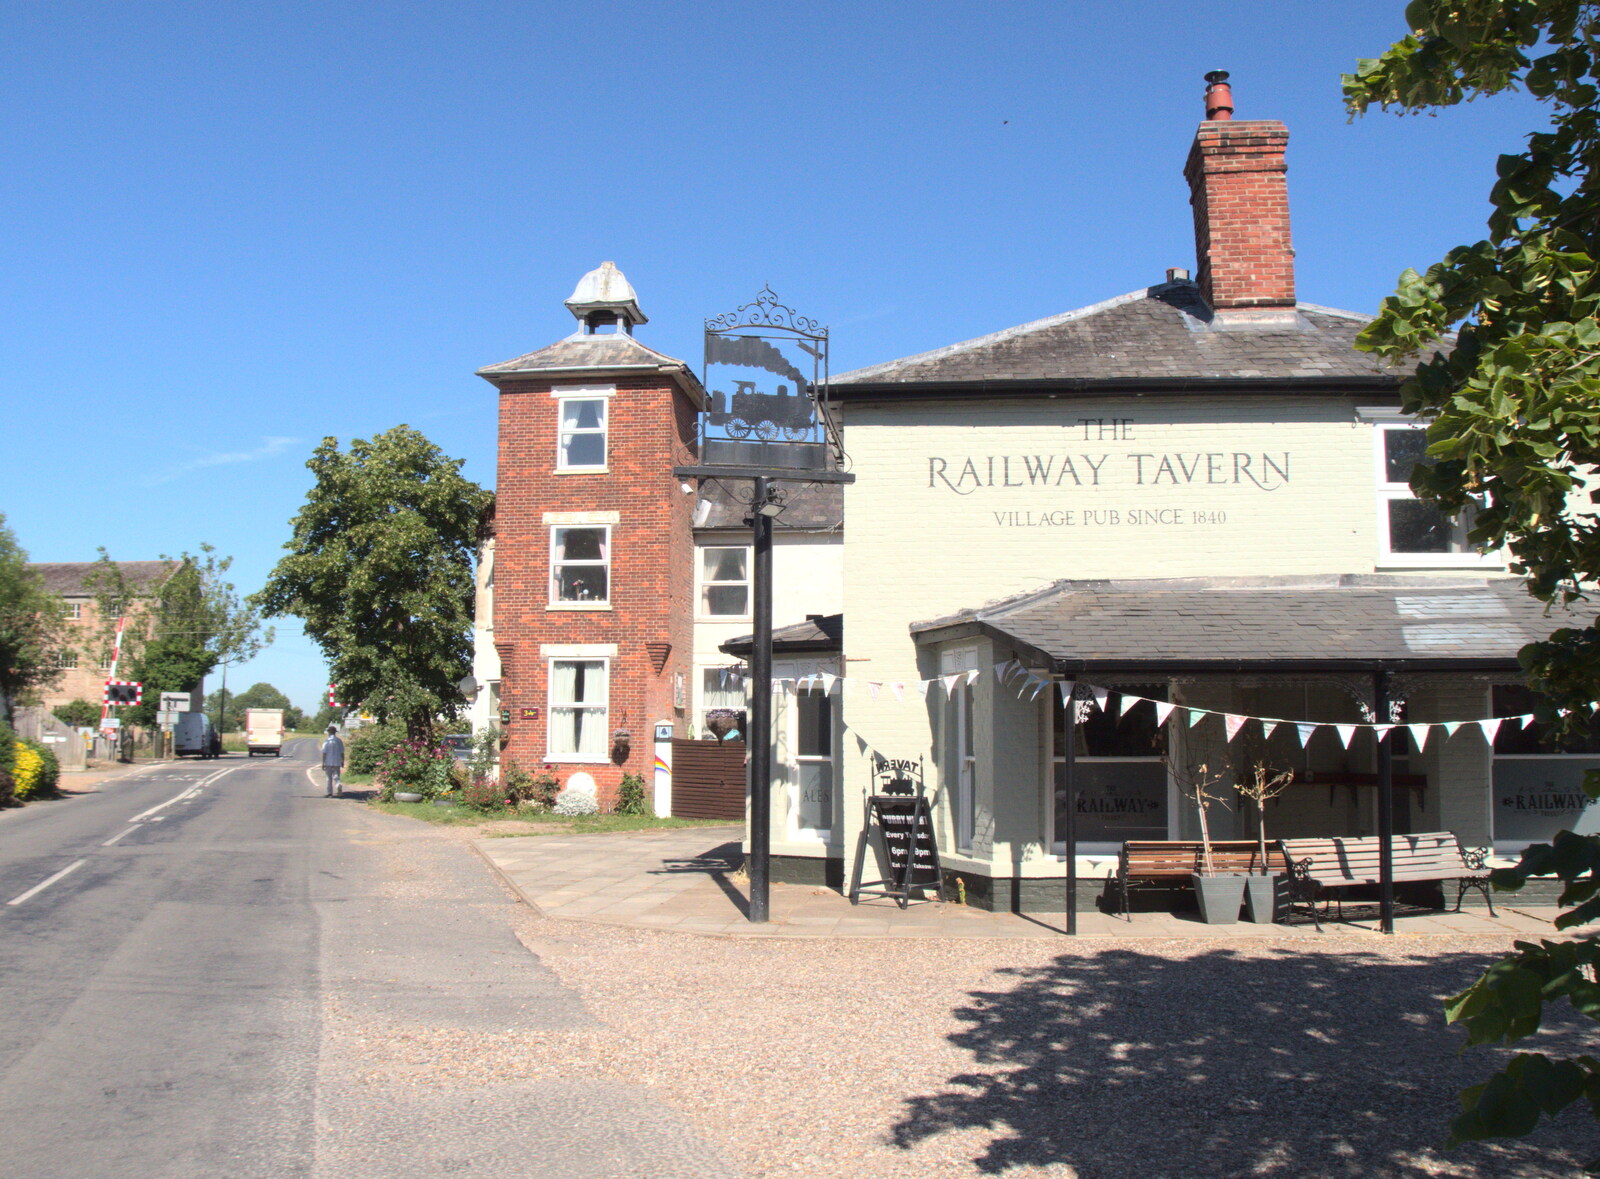 The Mellis Railway Tavern from Lockdown Bike Rides and an Anniversary Picnic, Mellis and Brome, Suffolk - 3rd July 2020